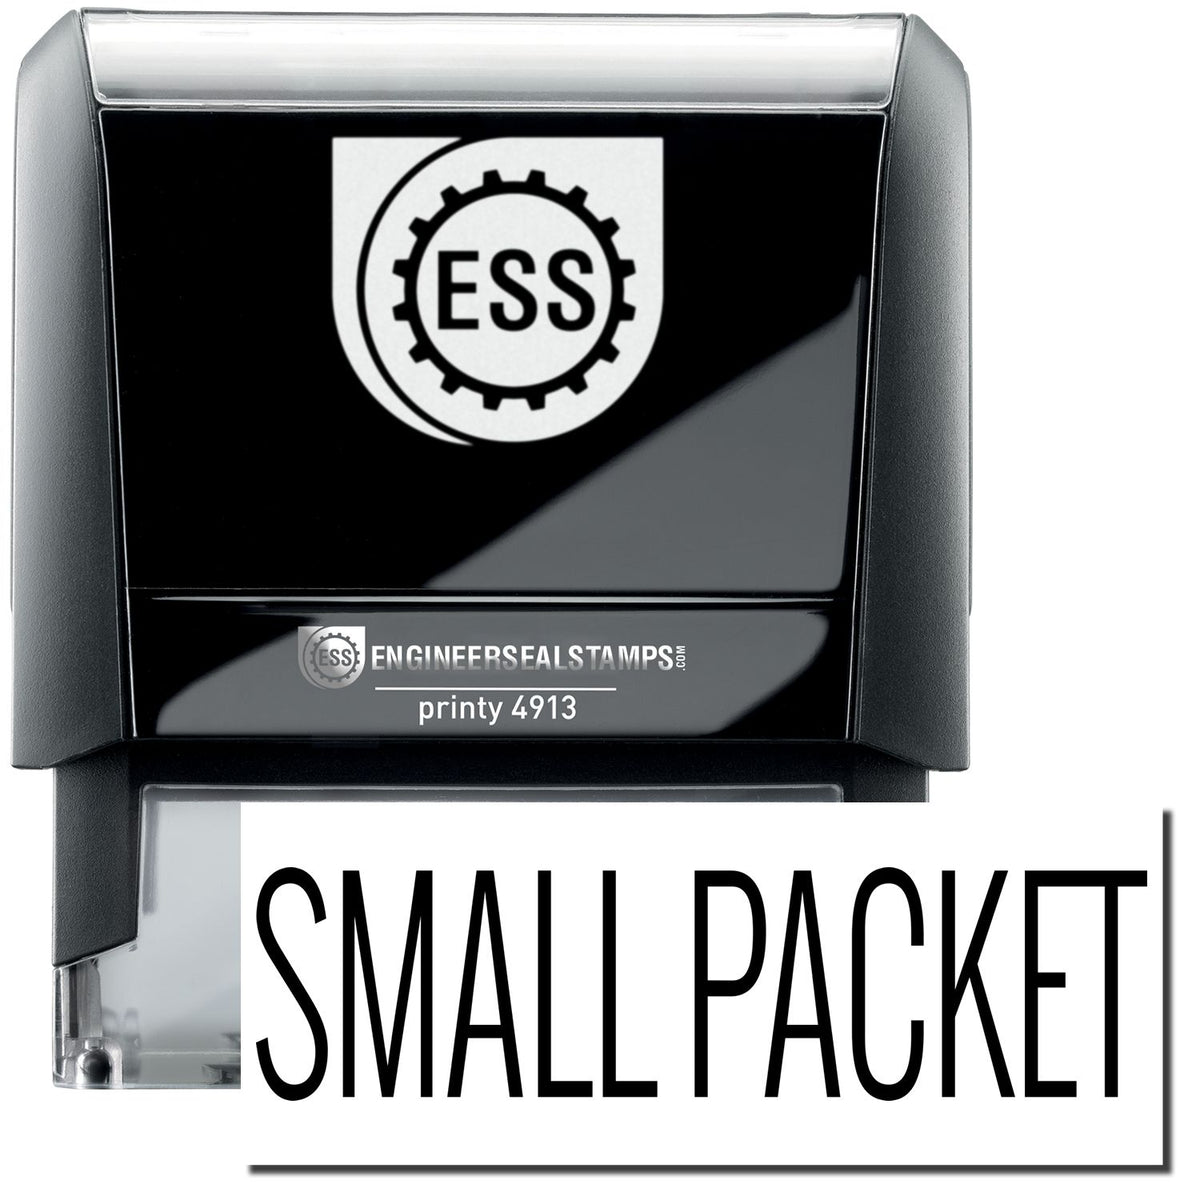 A self-inking stamp with a stamped image showing how the text &quot;SMALL PACKET&quot; in a large narrow font is displayed by it after stamping.